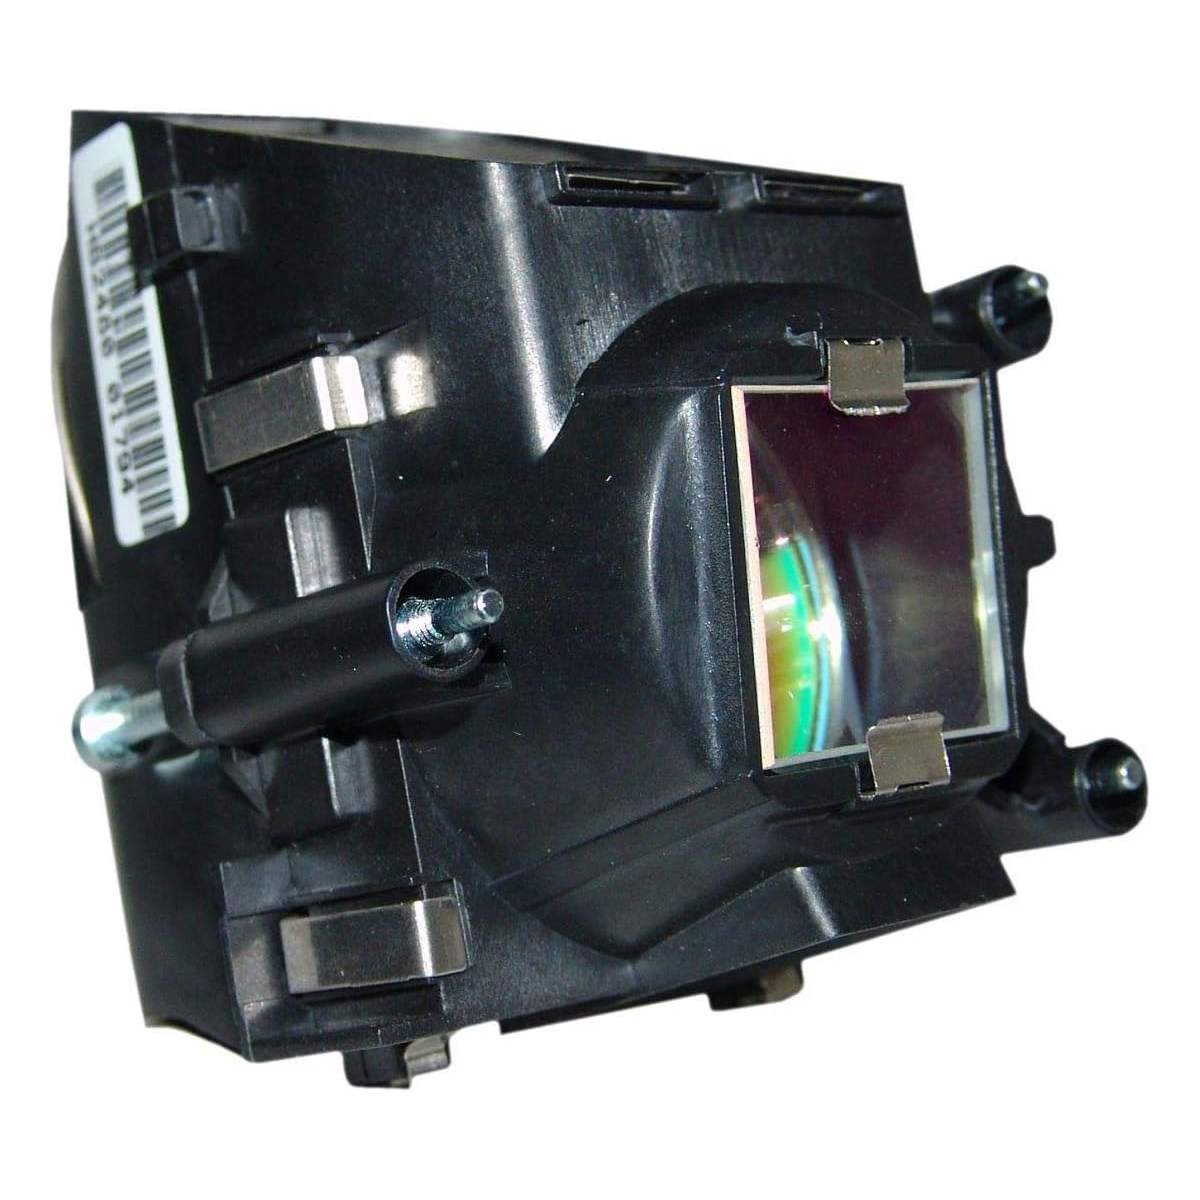 Replacement Projector lamp 78-6969-9693-9 For 3M H10 S10